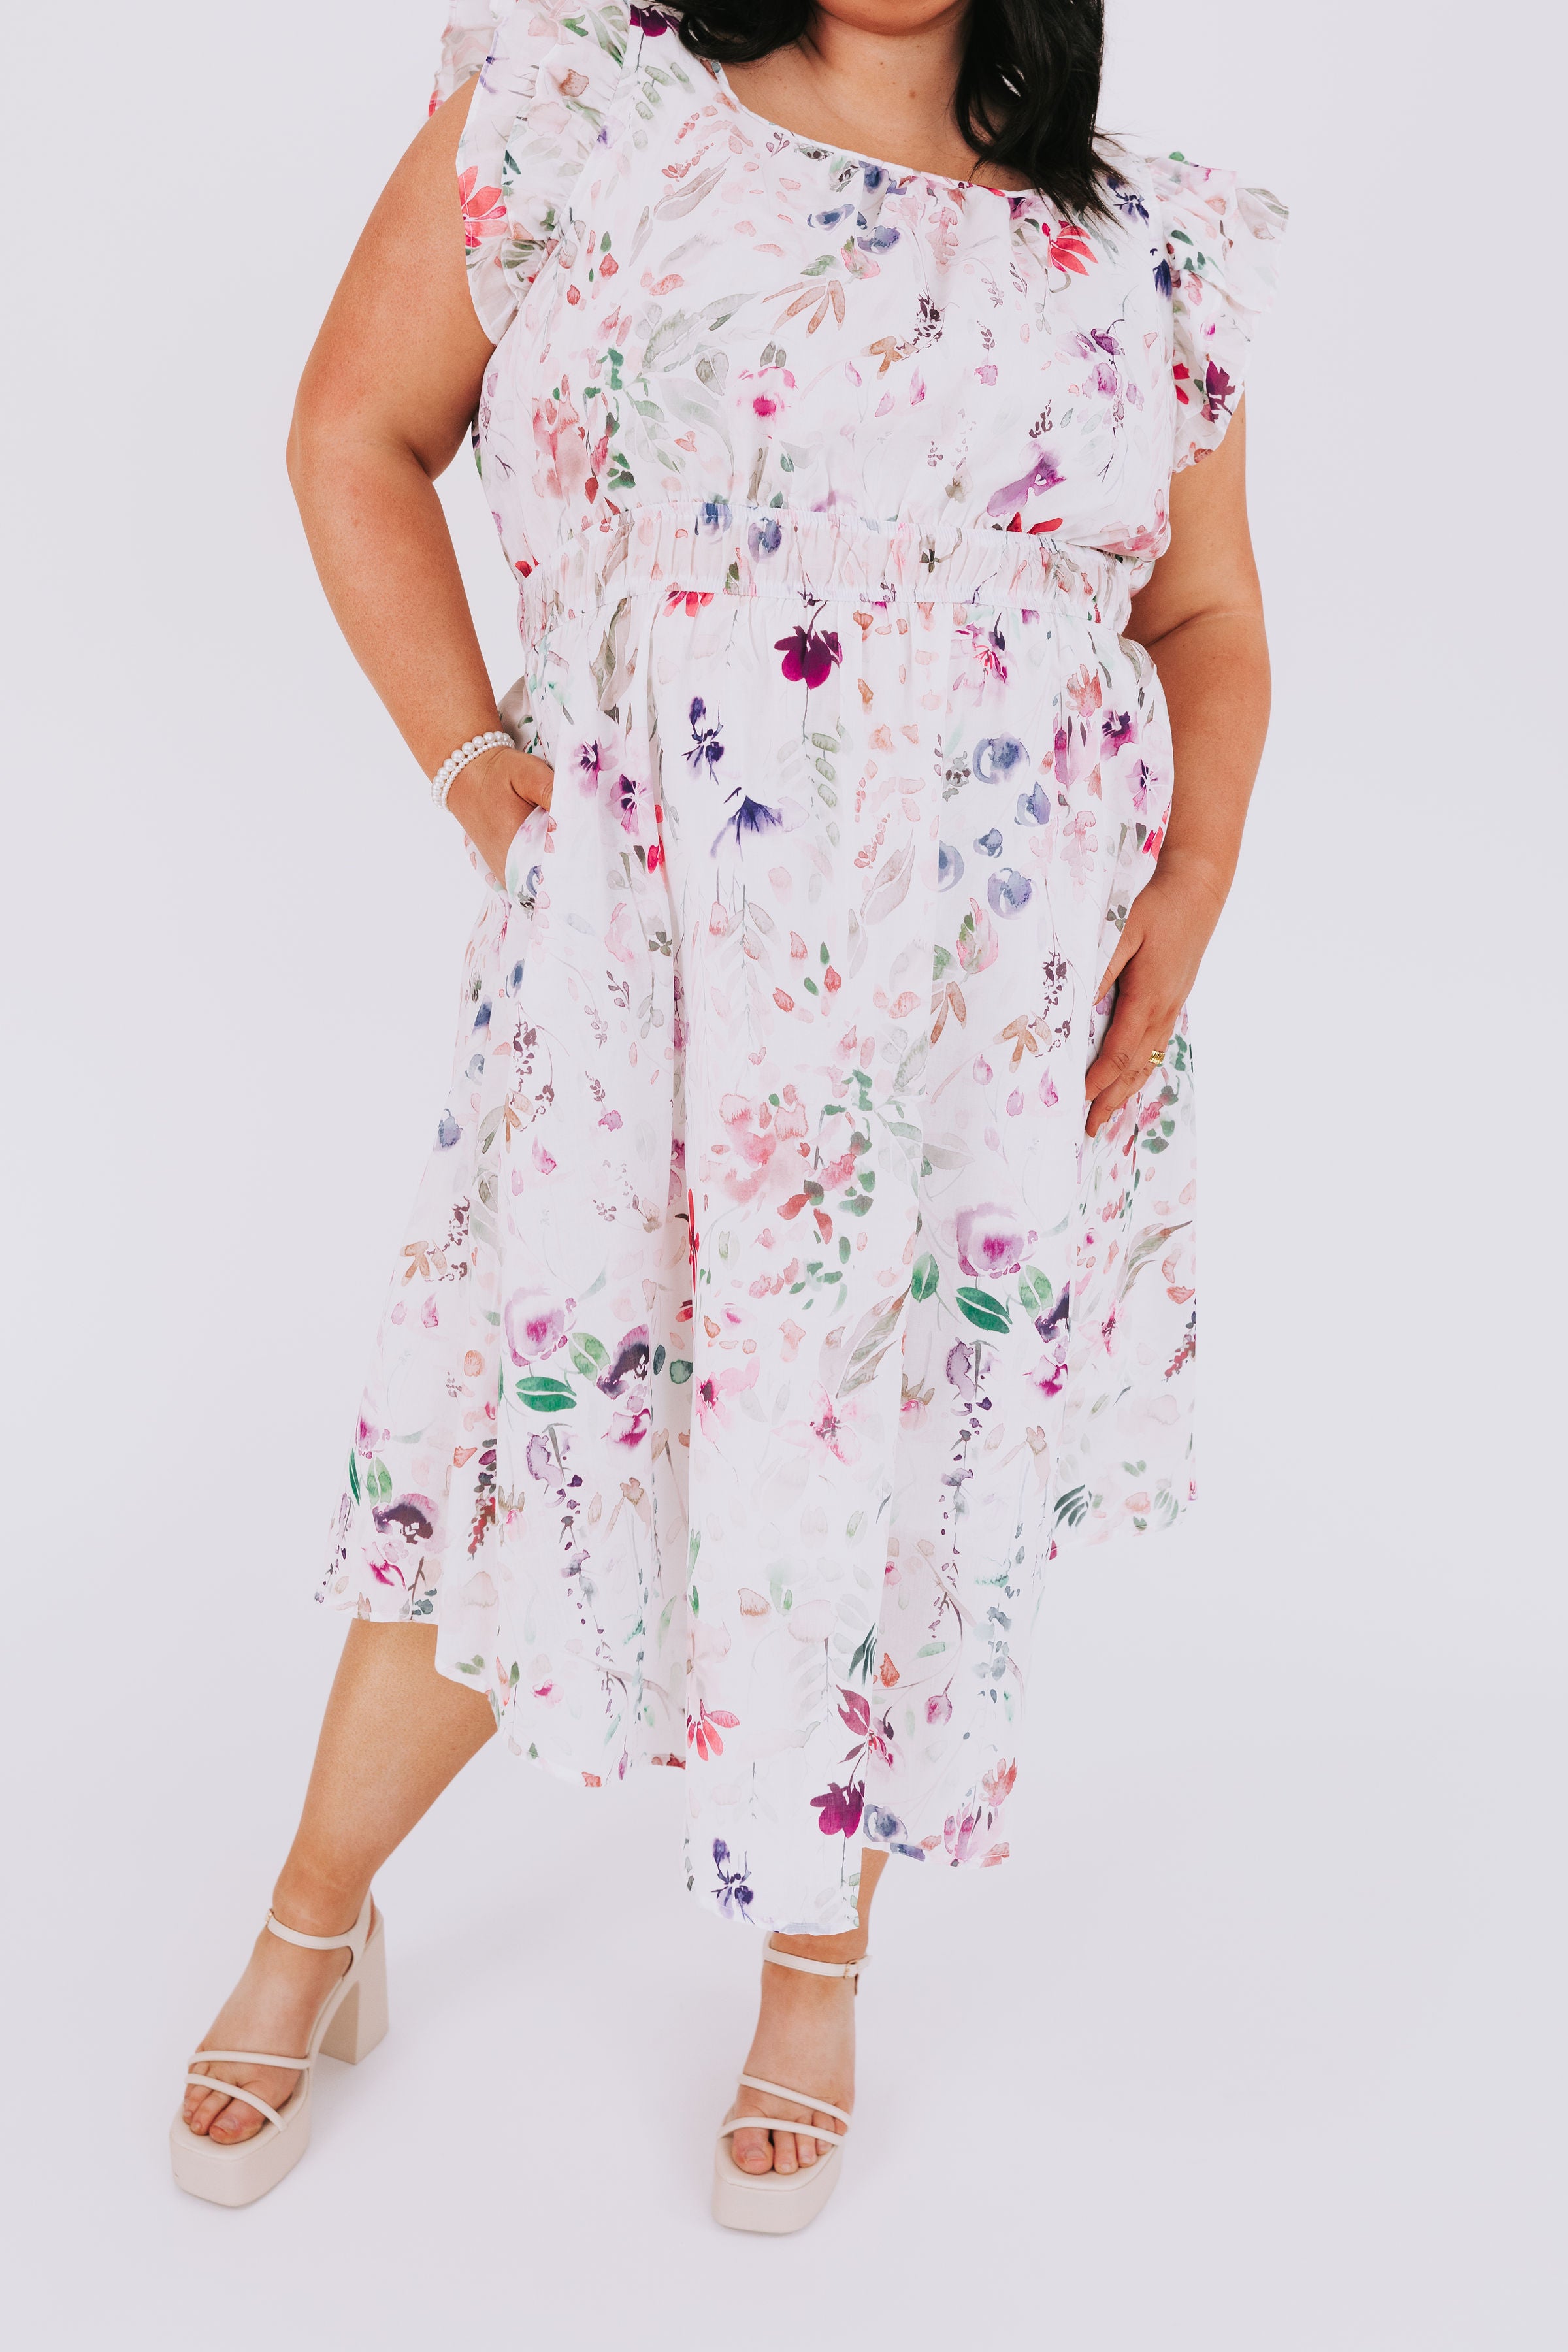 PLUS SIZE - Can't Hurry Love Dress